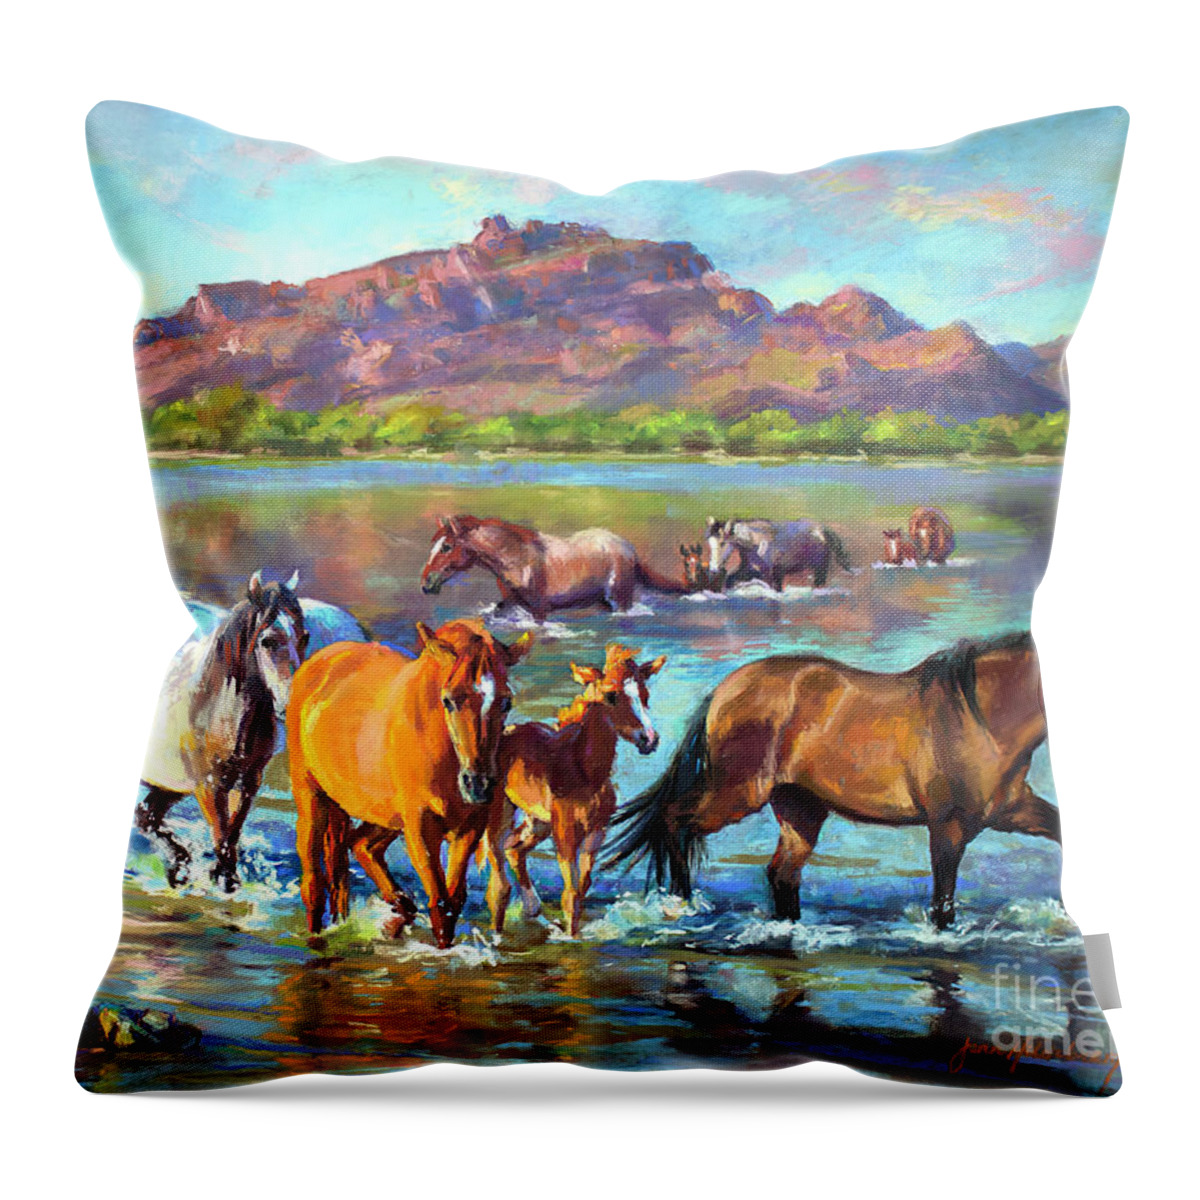 Pastel Throw Pillow featuring the painting Salt River Solitude by Jean Hildebrant